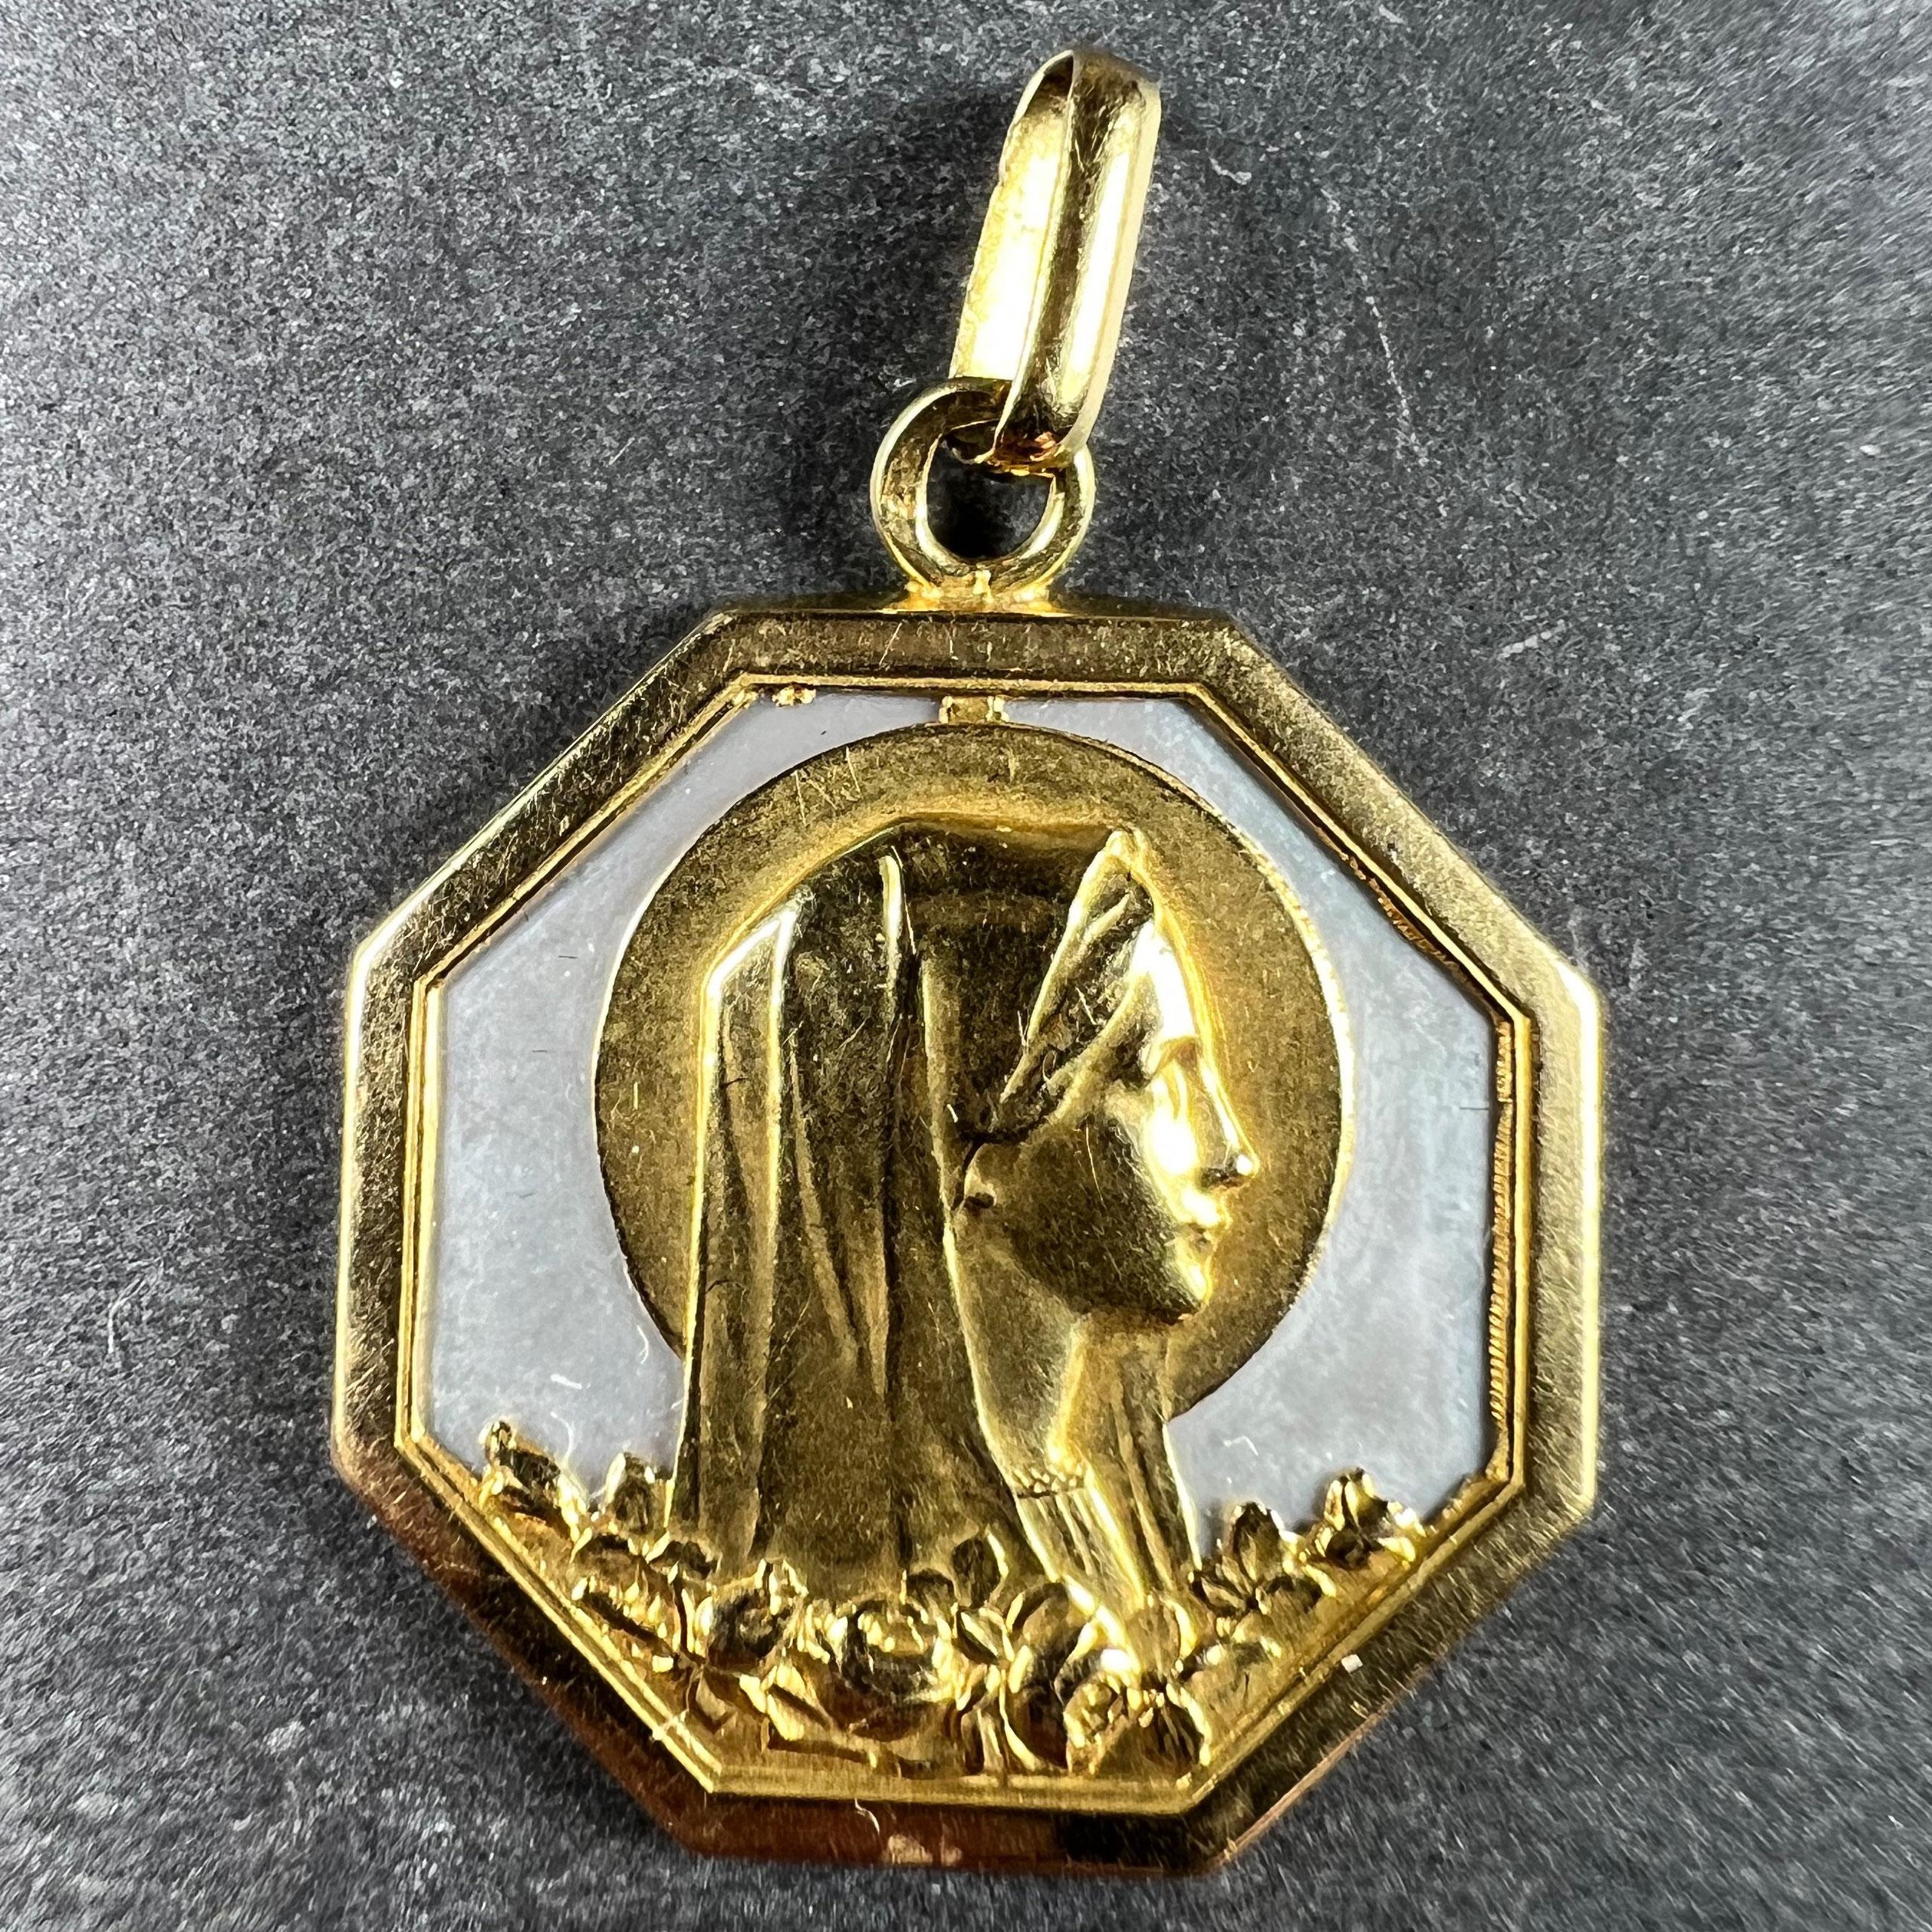 An 18 karat (18K) yellow gold charm pendant set with mother of pearl depicting the Virgin Mary with a halo above a field of roses. Engraved to the reverse with a monogram for GM / MG and the date 18-5-36. Stamped with the owl mark for 18 karat gold